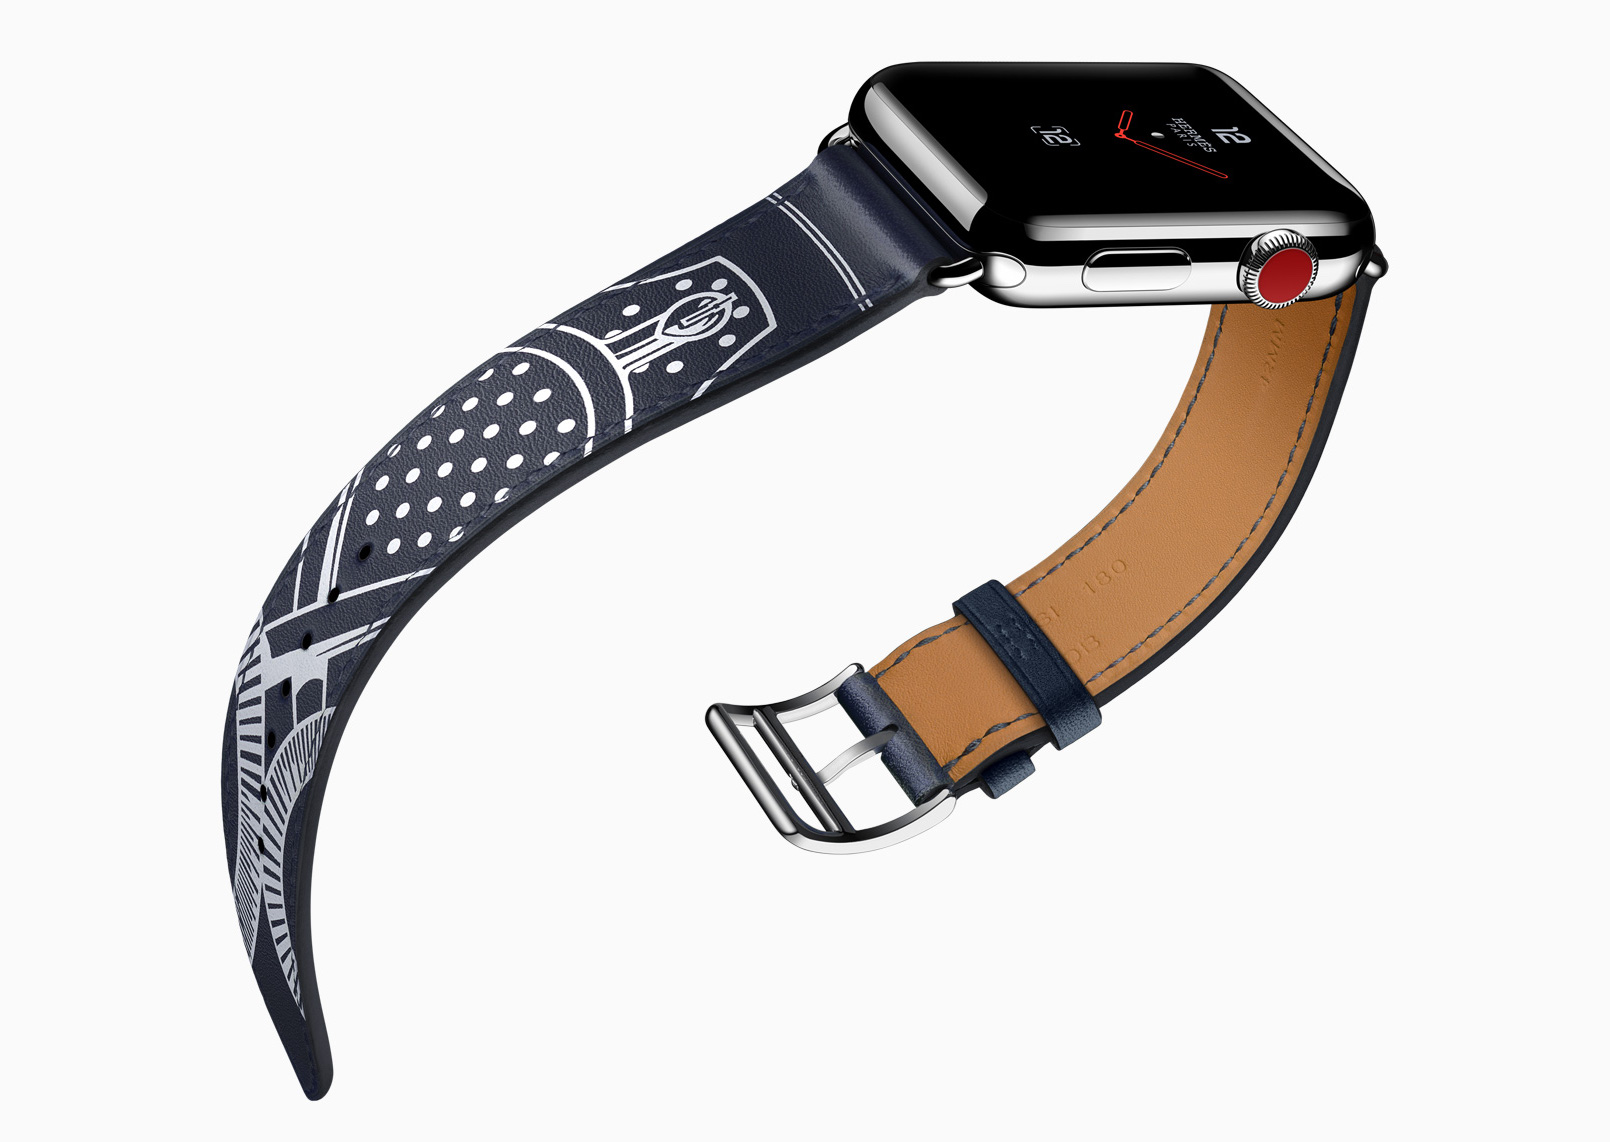 Apple Watch Series 3 Features You Should Know About